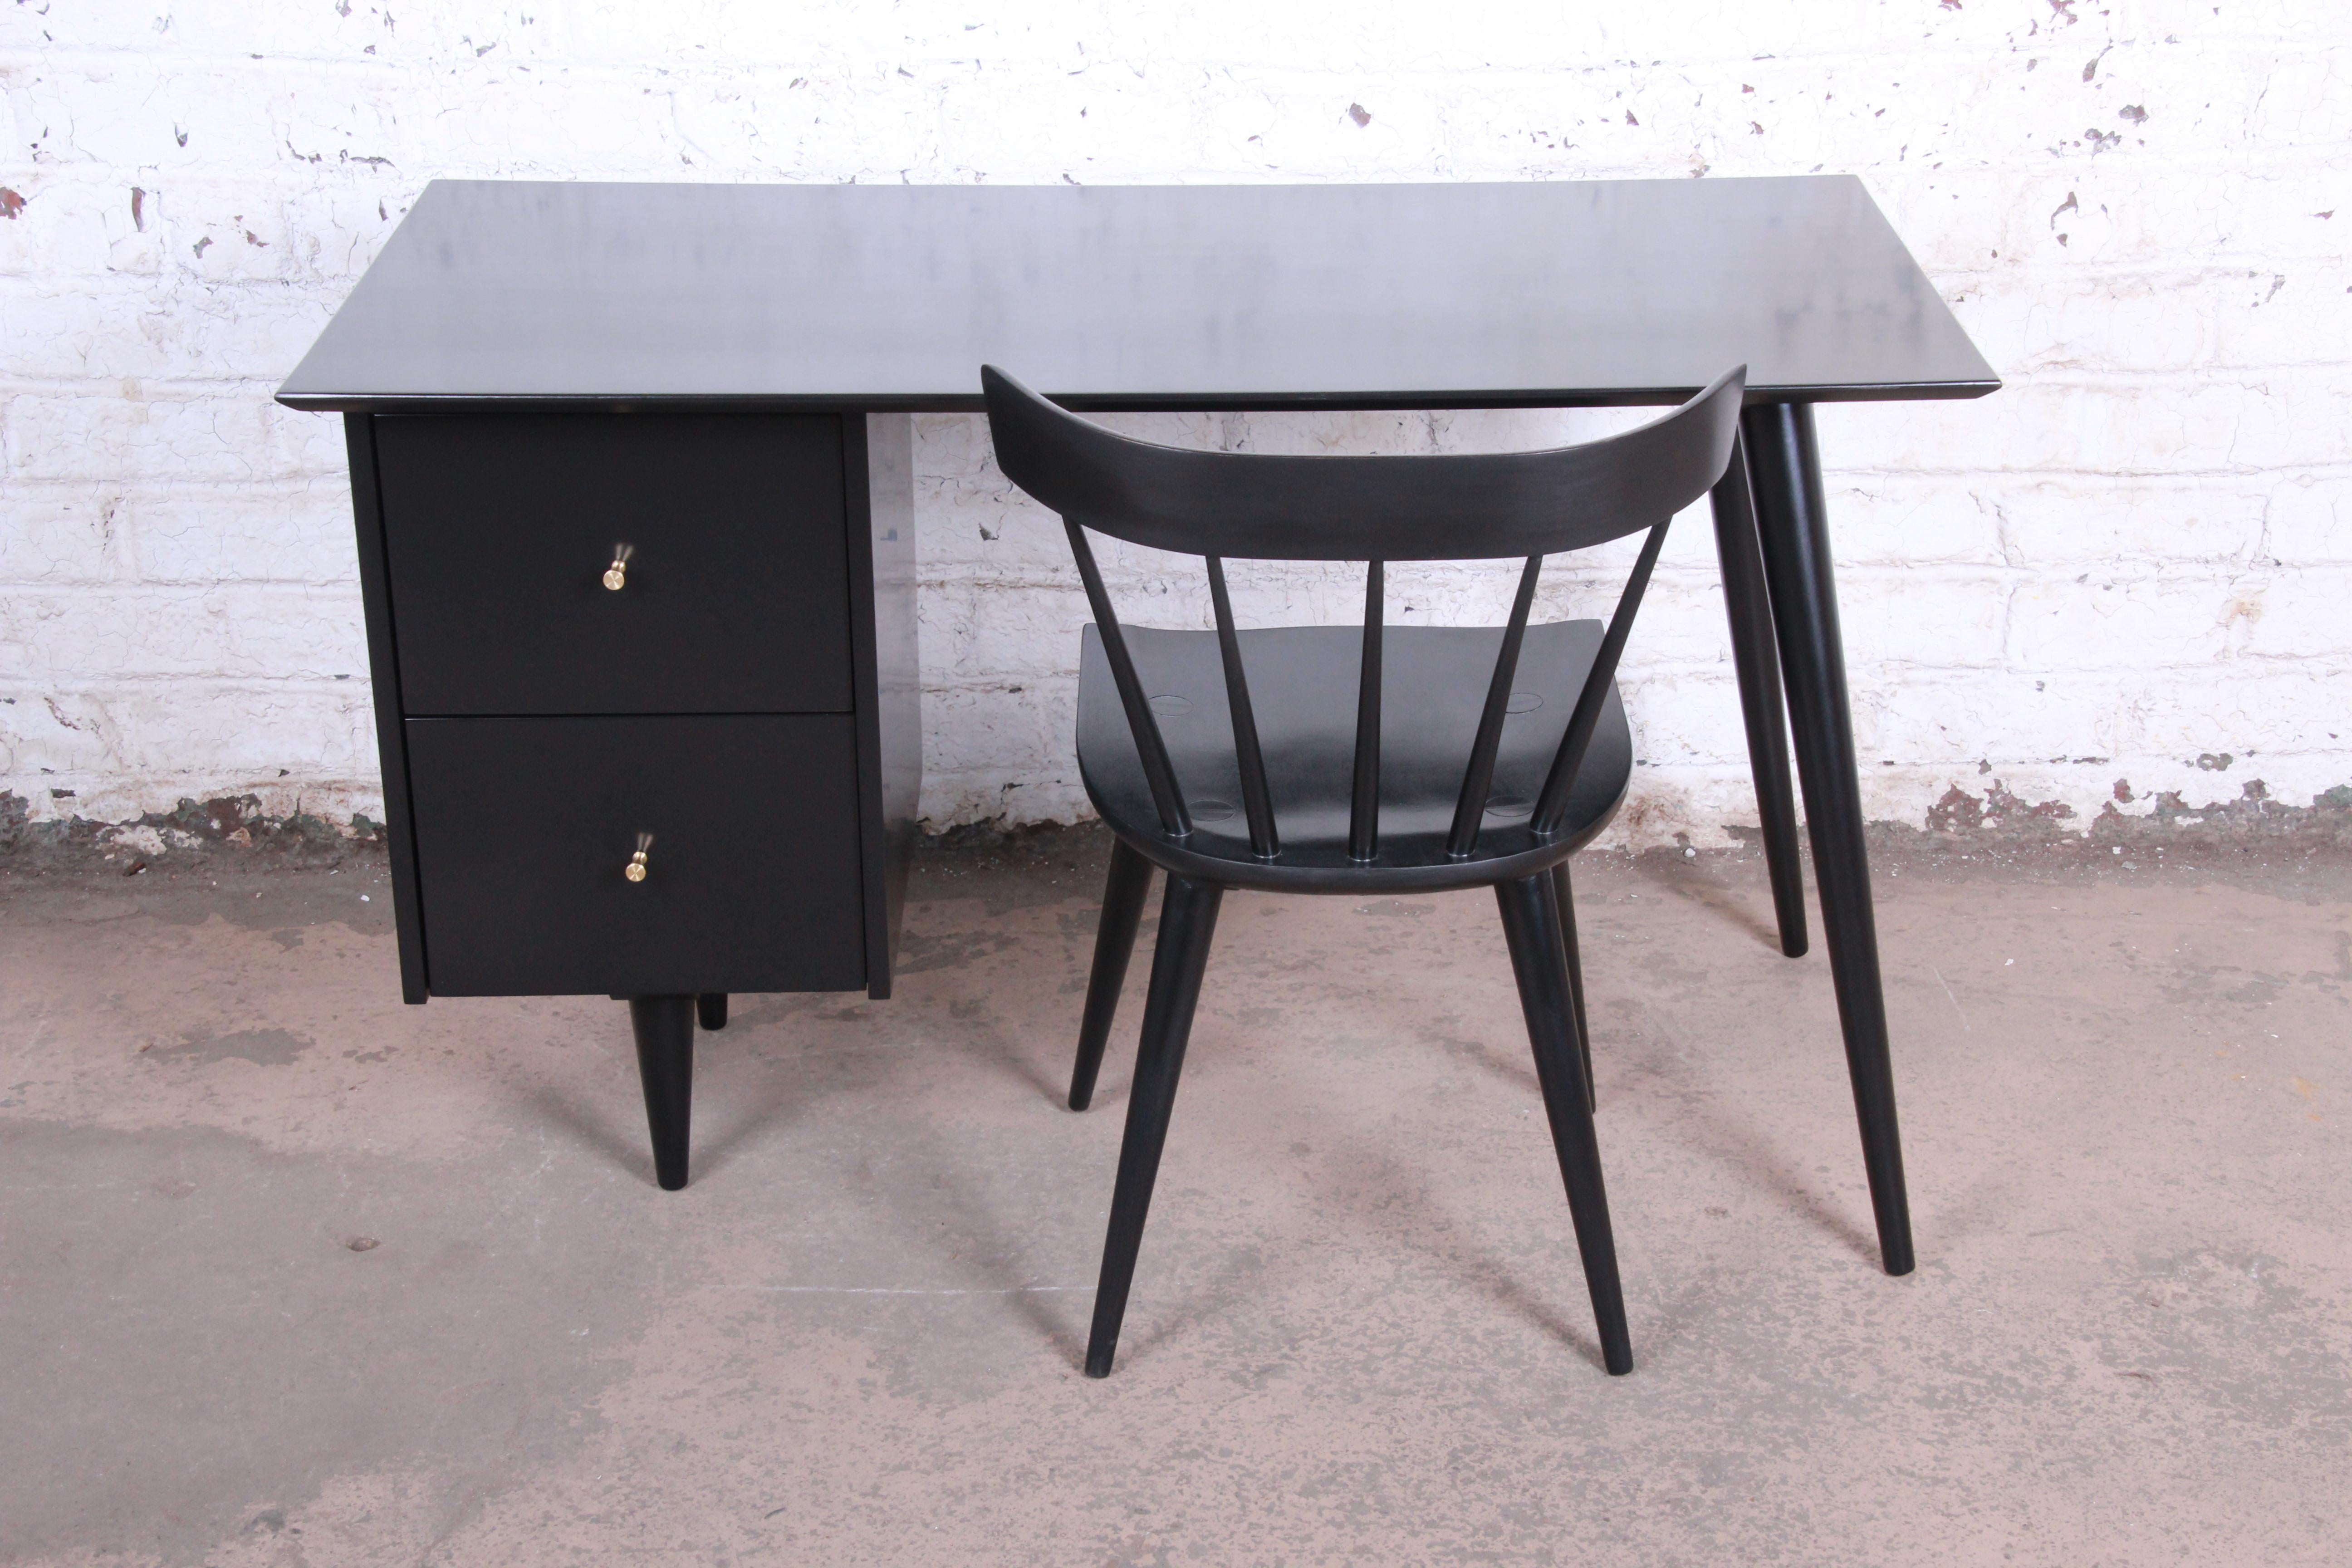 An exceptional Minimalist Mid-Century Modern black lacquered writing desk with chair

Designed by Paul McCobb for Winchendon Furniture 